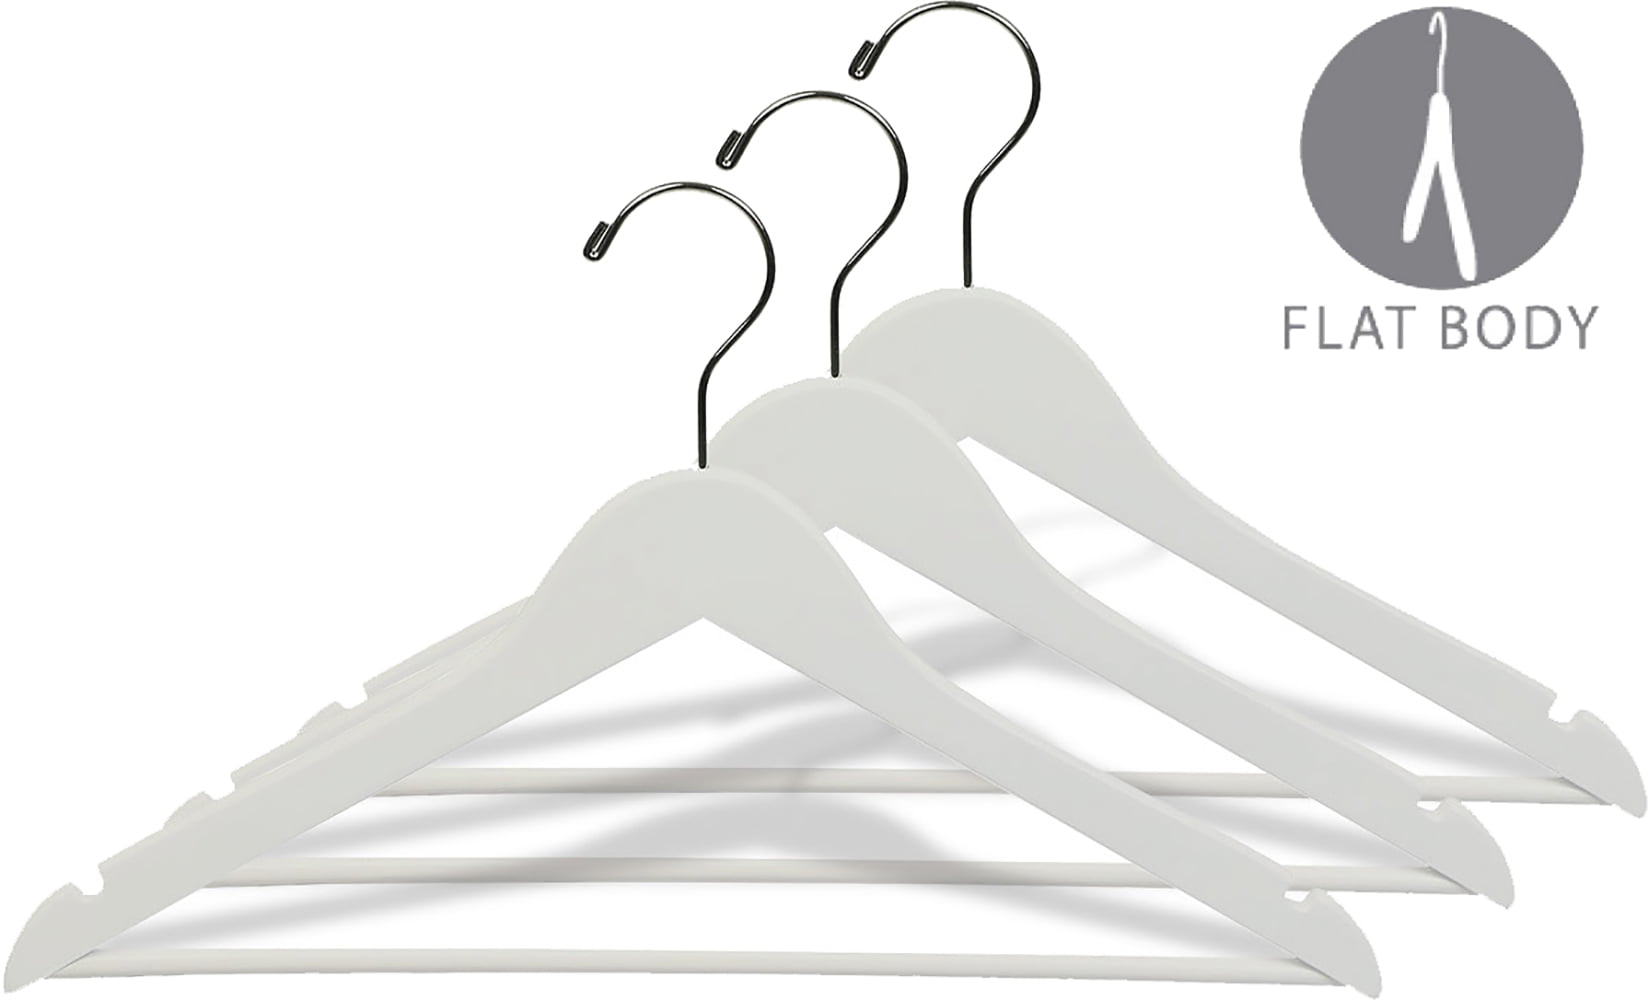 17 Wooden Coat Hanger - White with Chrome Clips